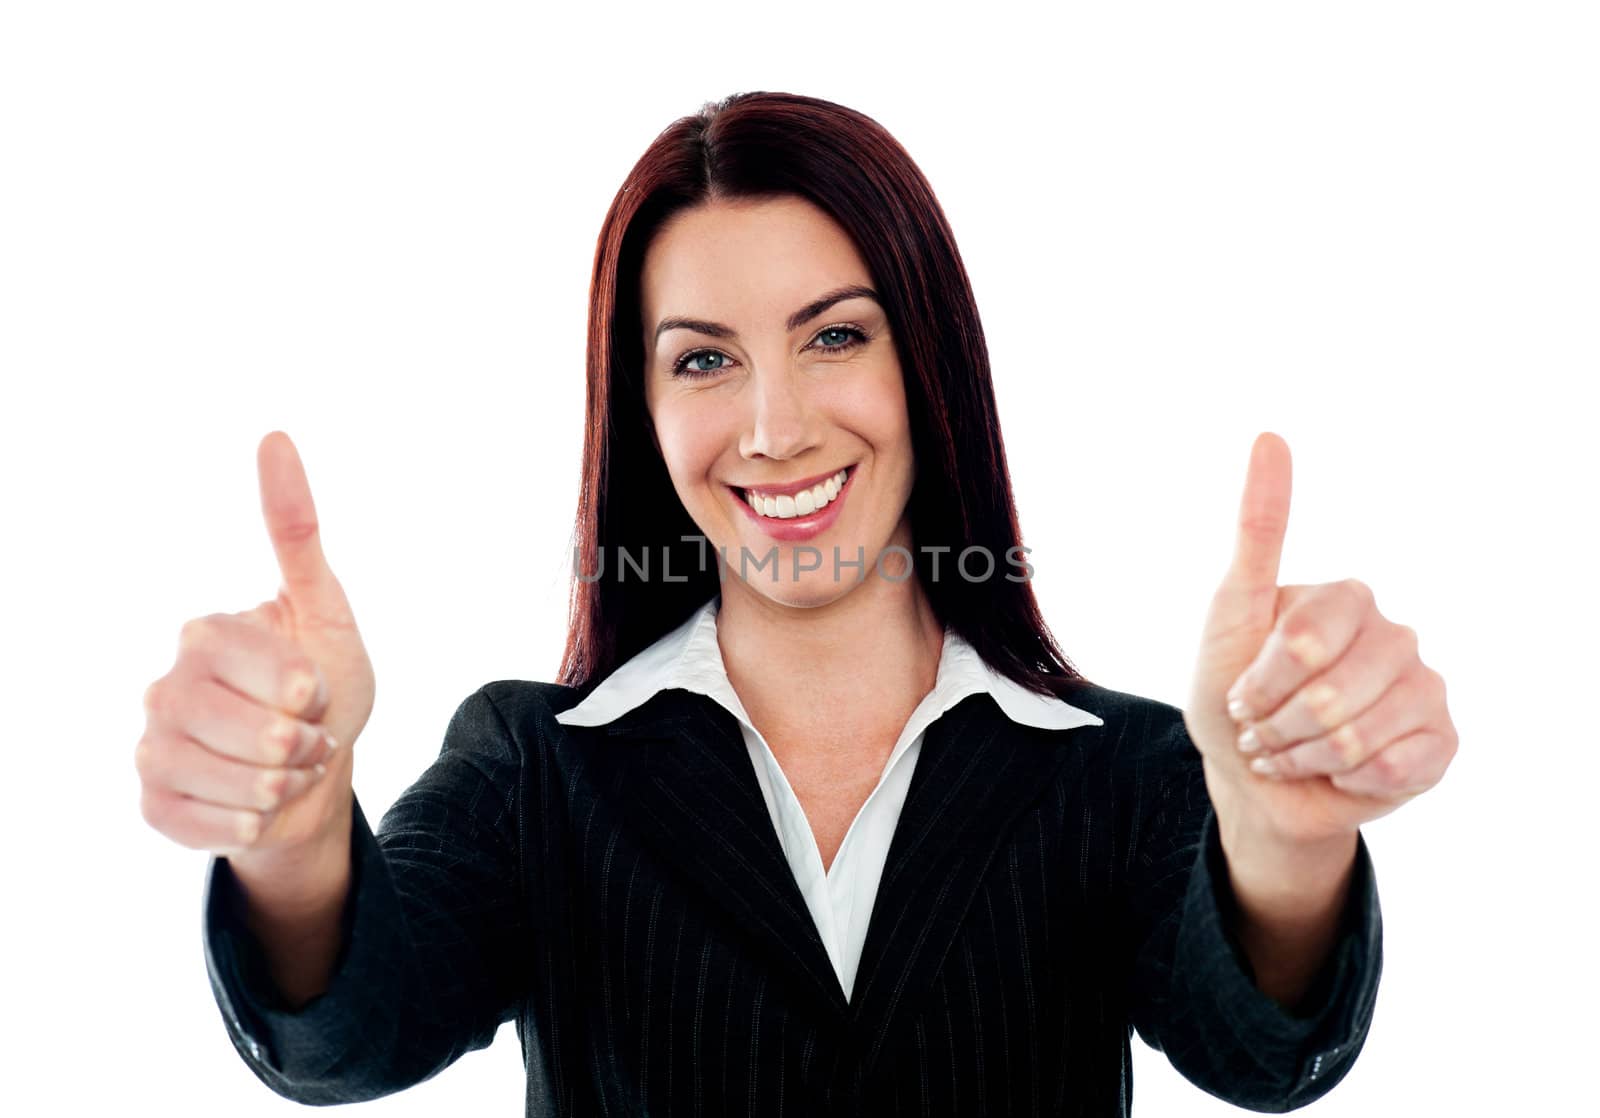 Confident businesswoman showing double thumbs-up isolated over white